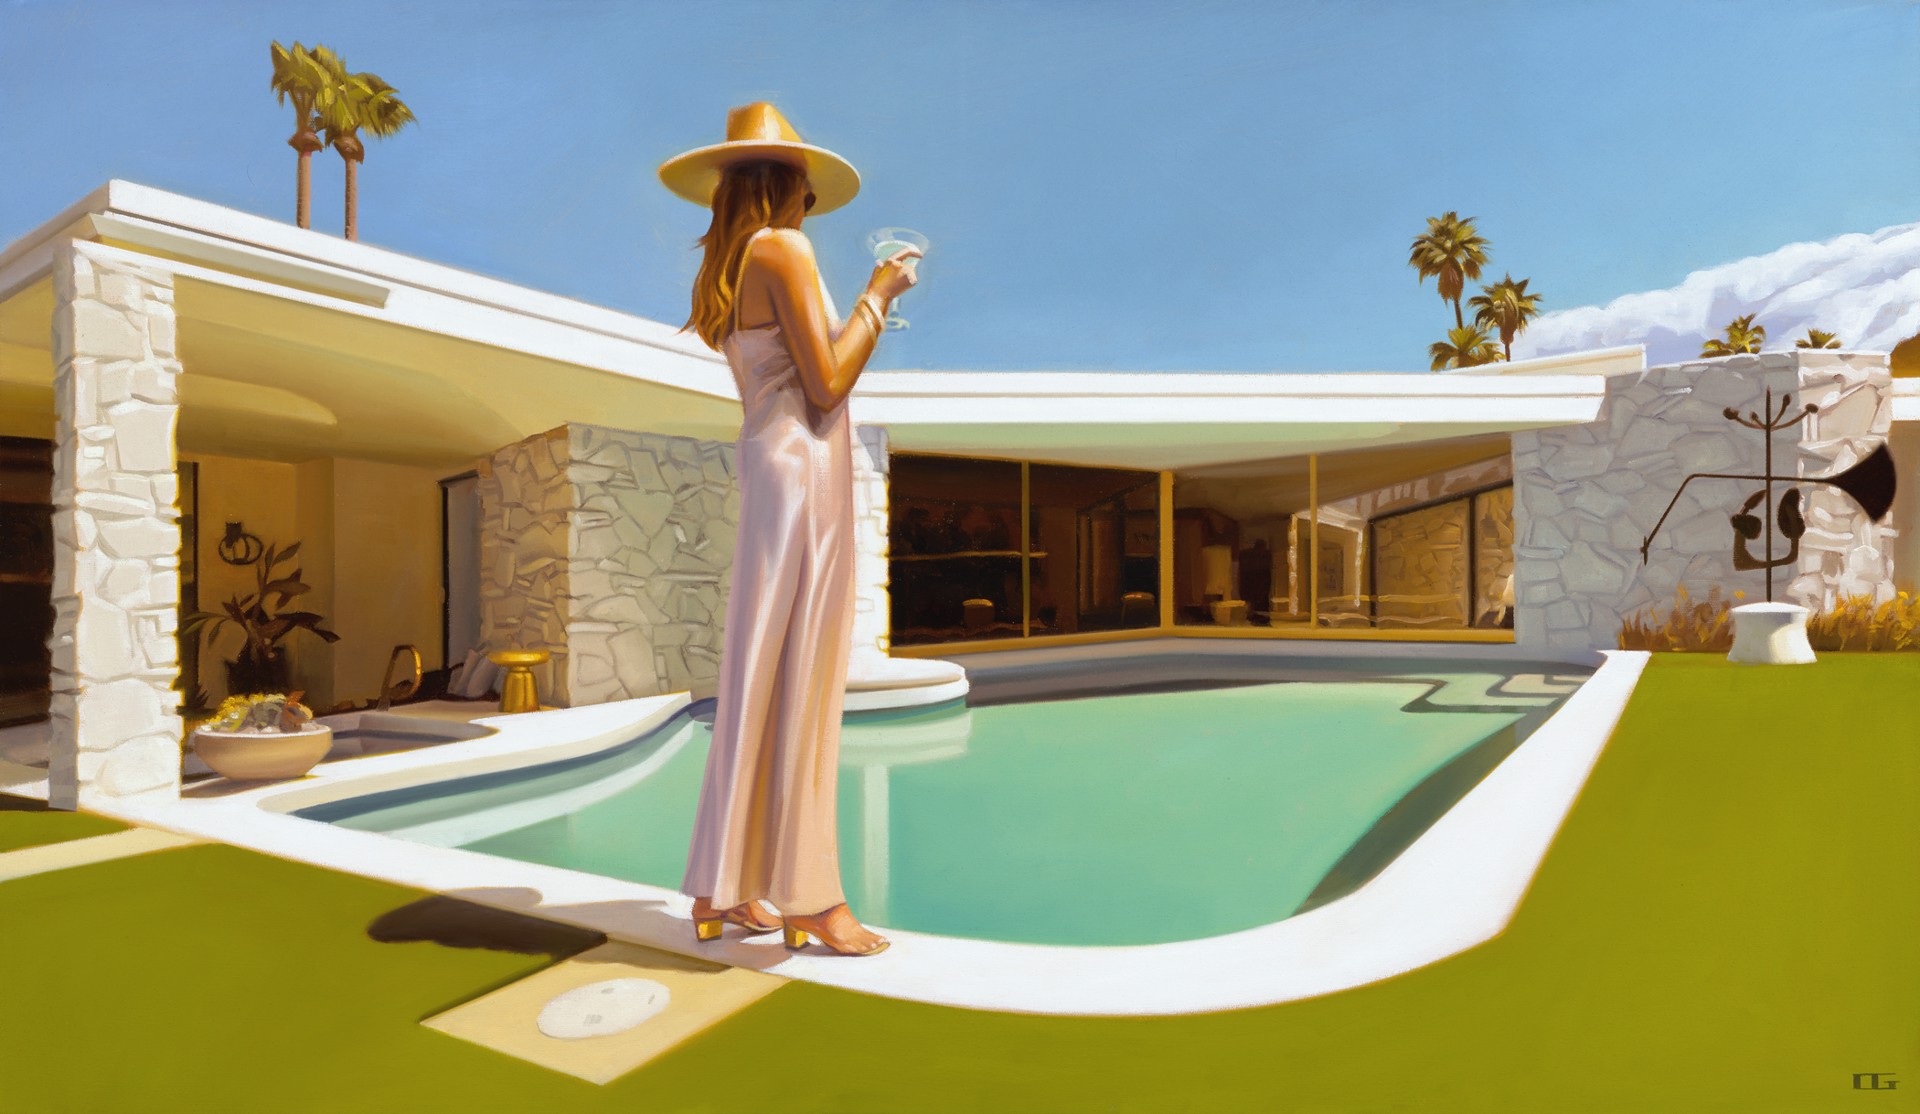 Palm Springs Perspective II (S/N) by Carrie Graber